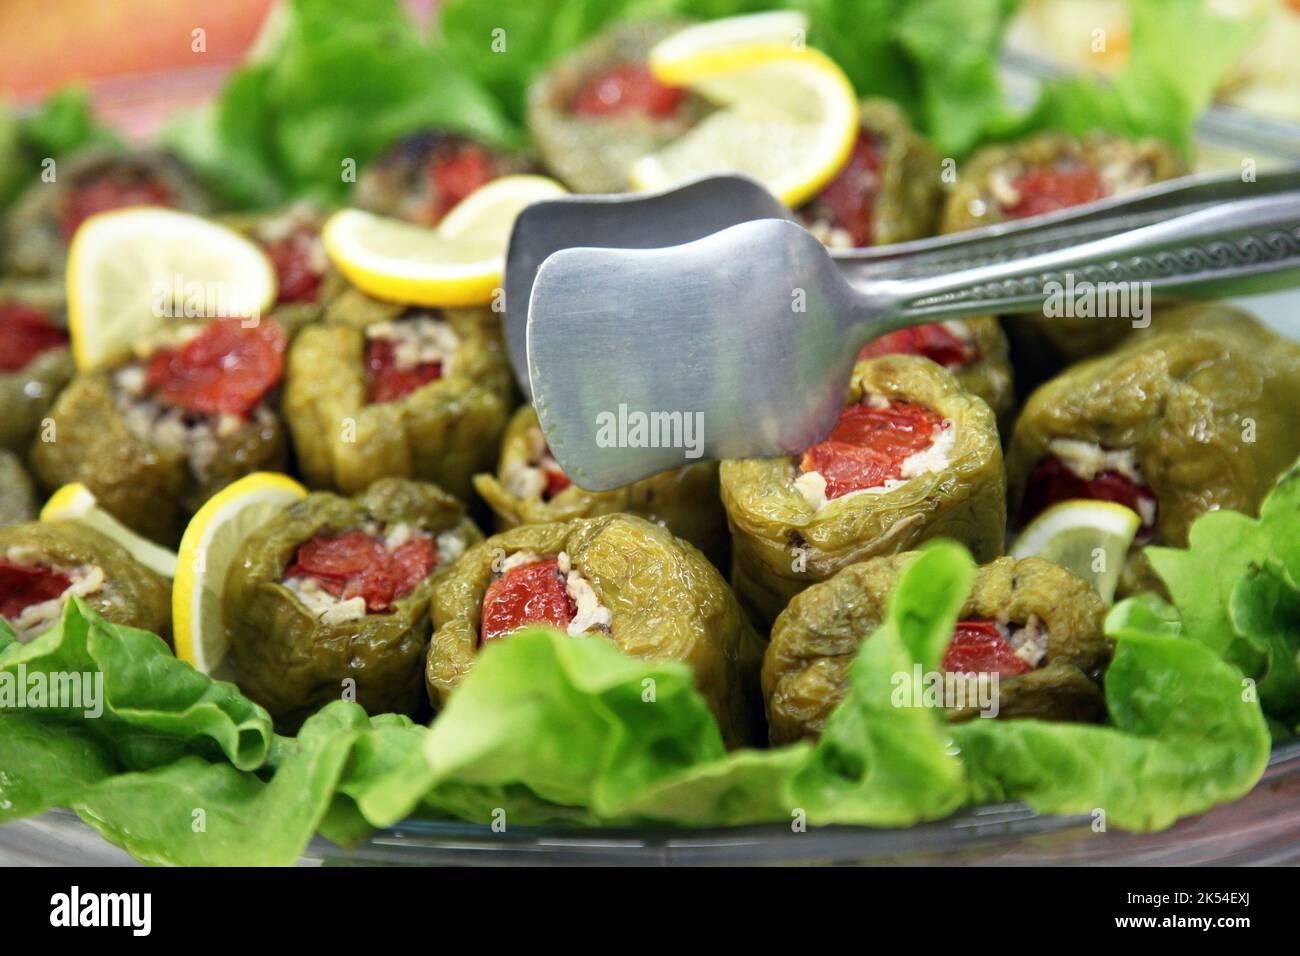 Turkish appetizer food 'Stuffed Peppers' (Biber Dolma) on the dinner plate. Stock Photo